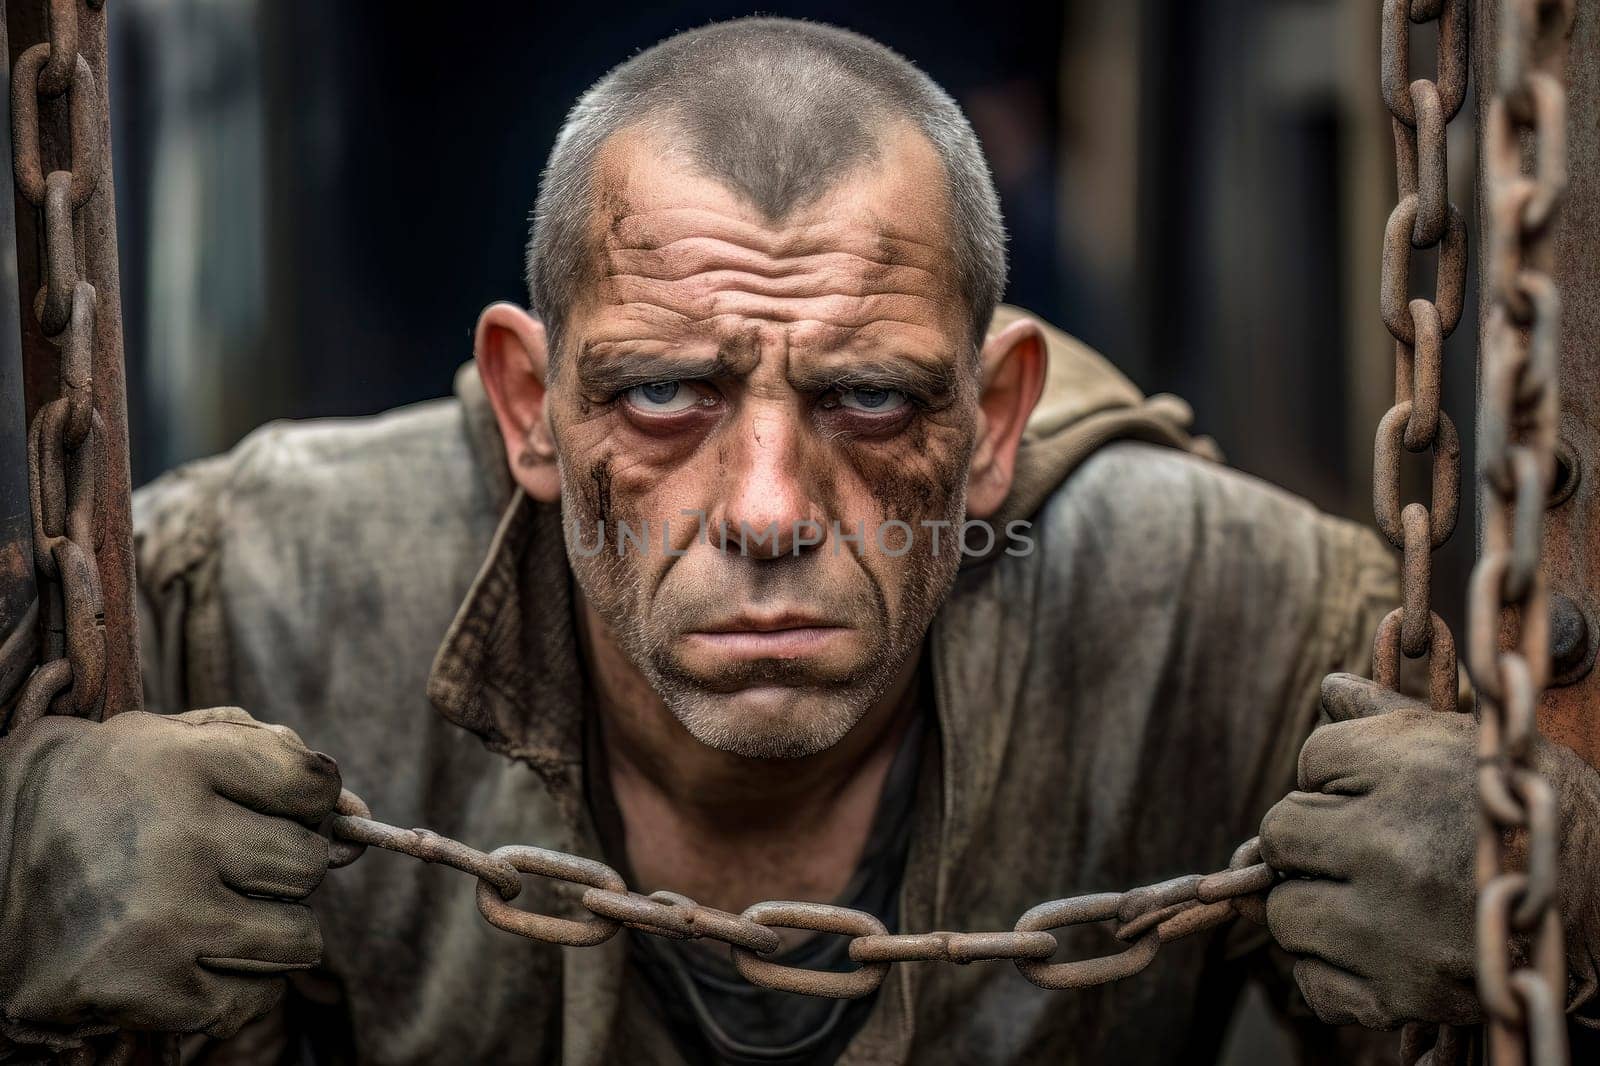 Emotive close-up portrait of a melancholic man trapped in chains.